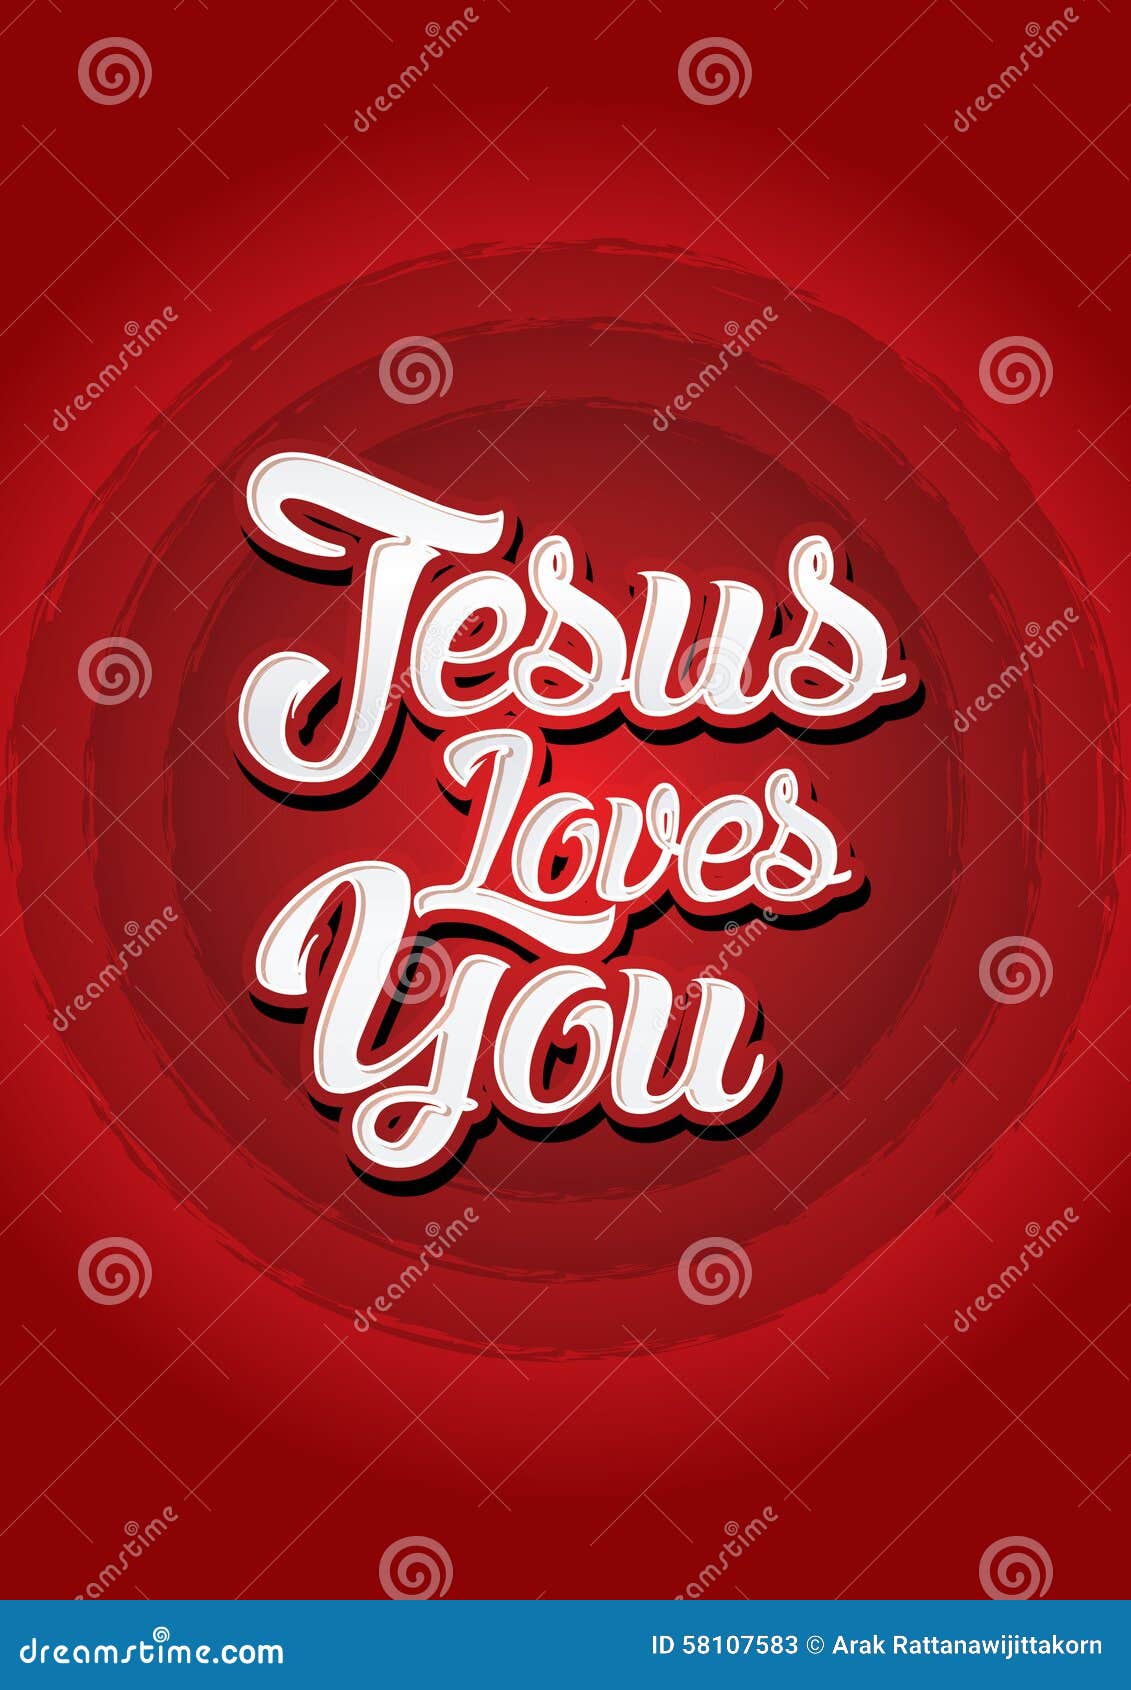 Jesus Loves You Banners